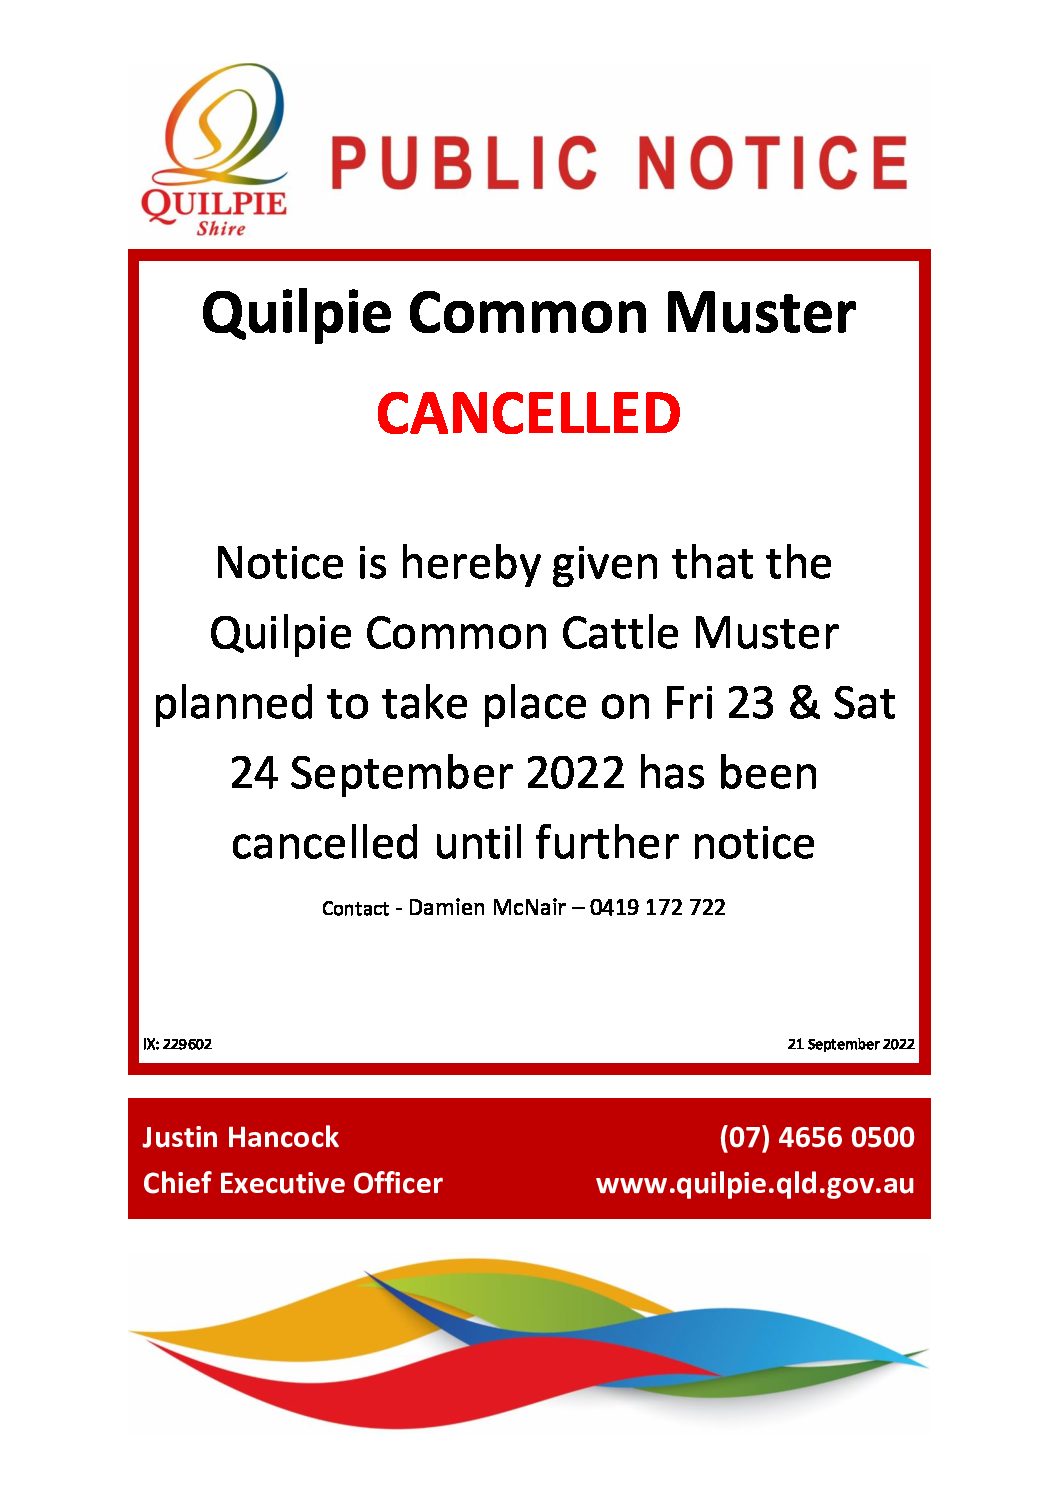 Quilpie Common Muster Cancelled